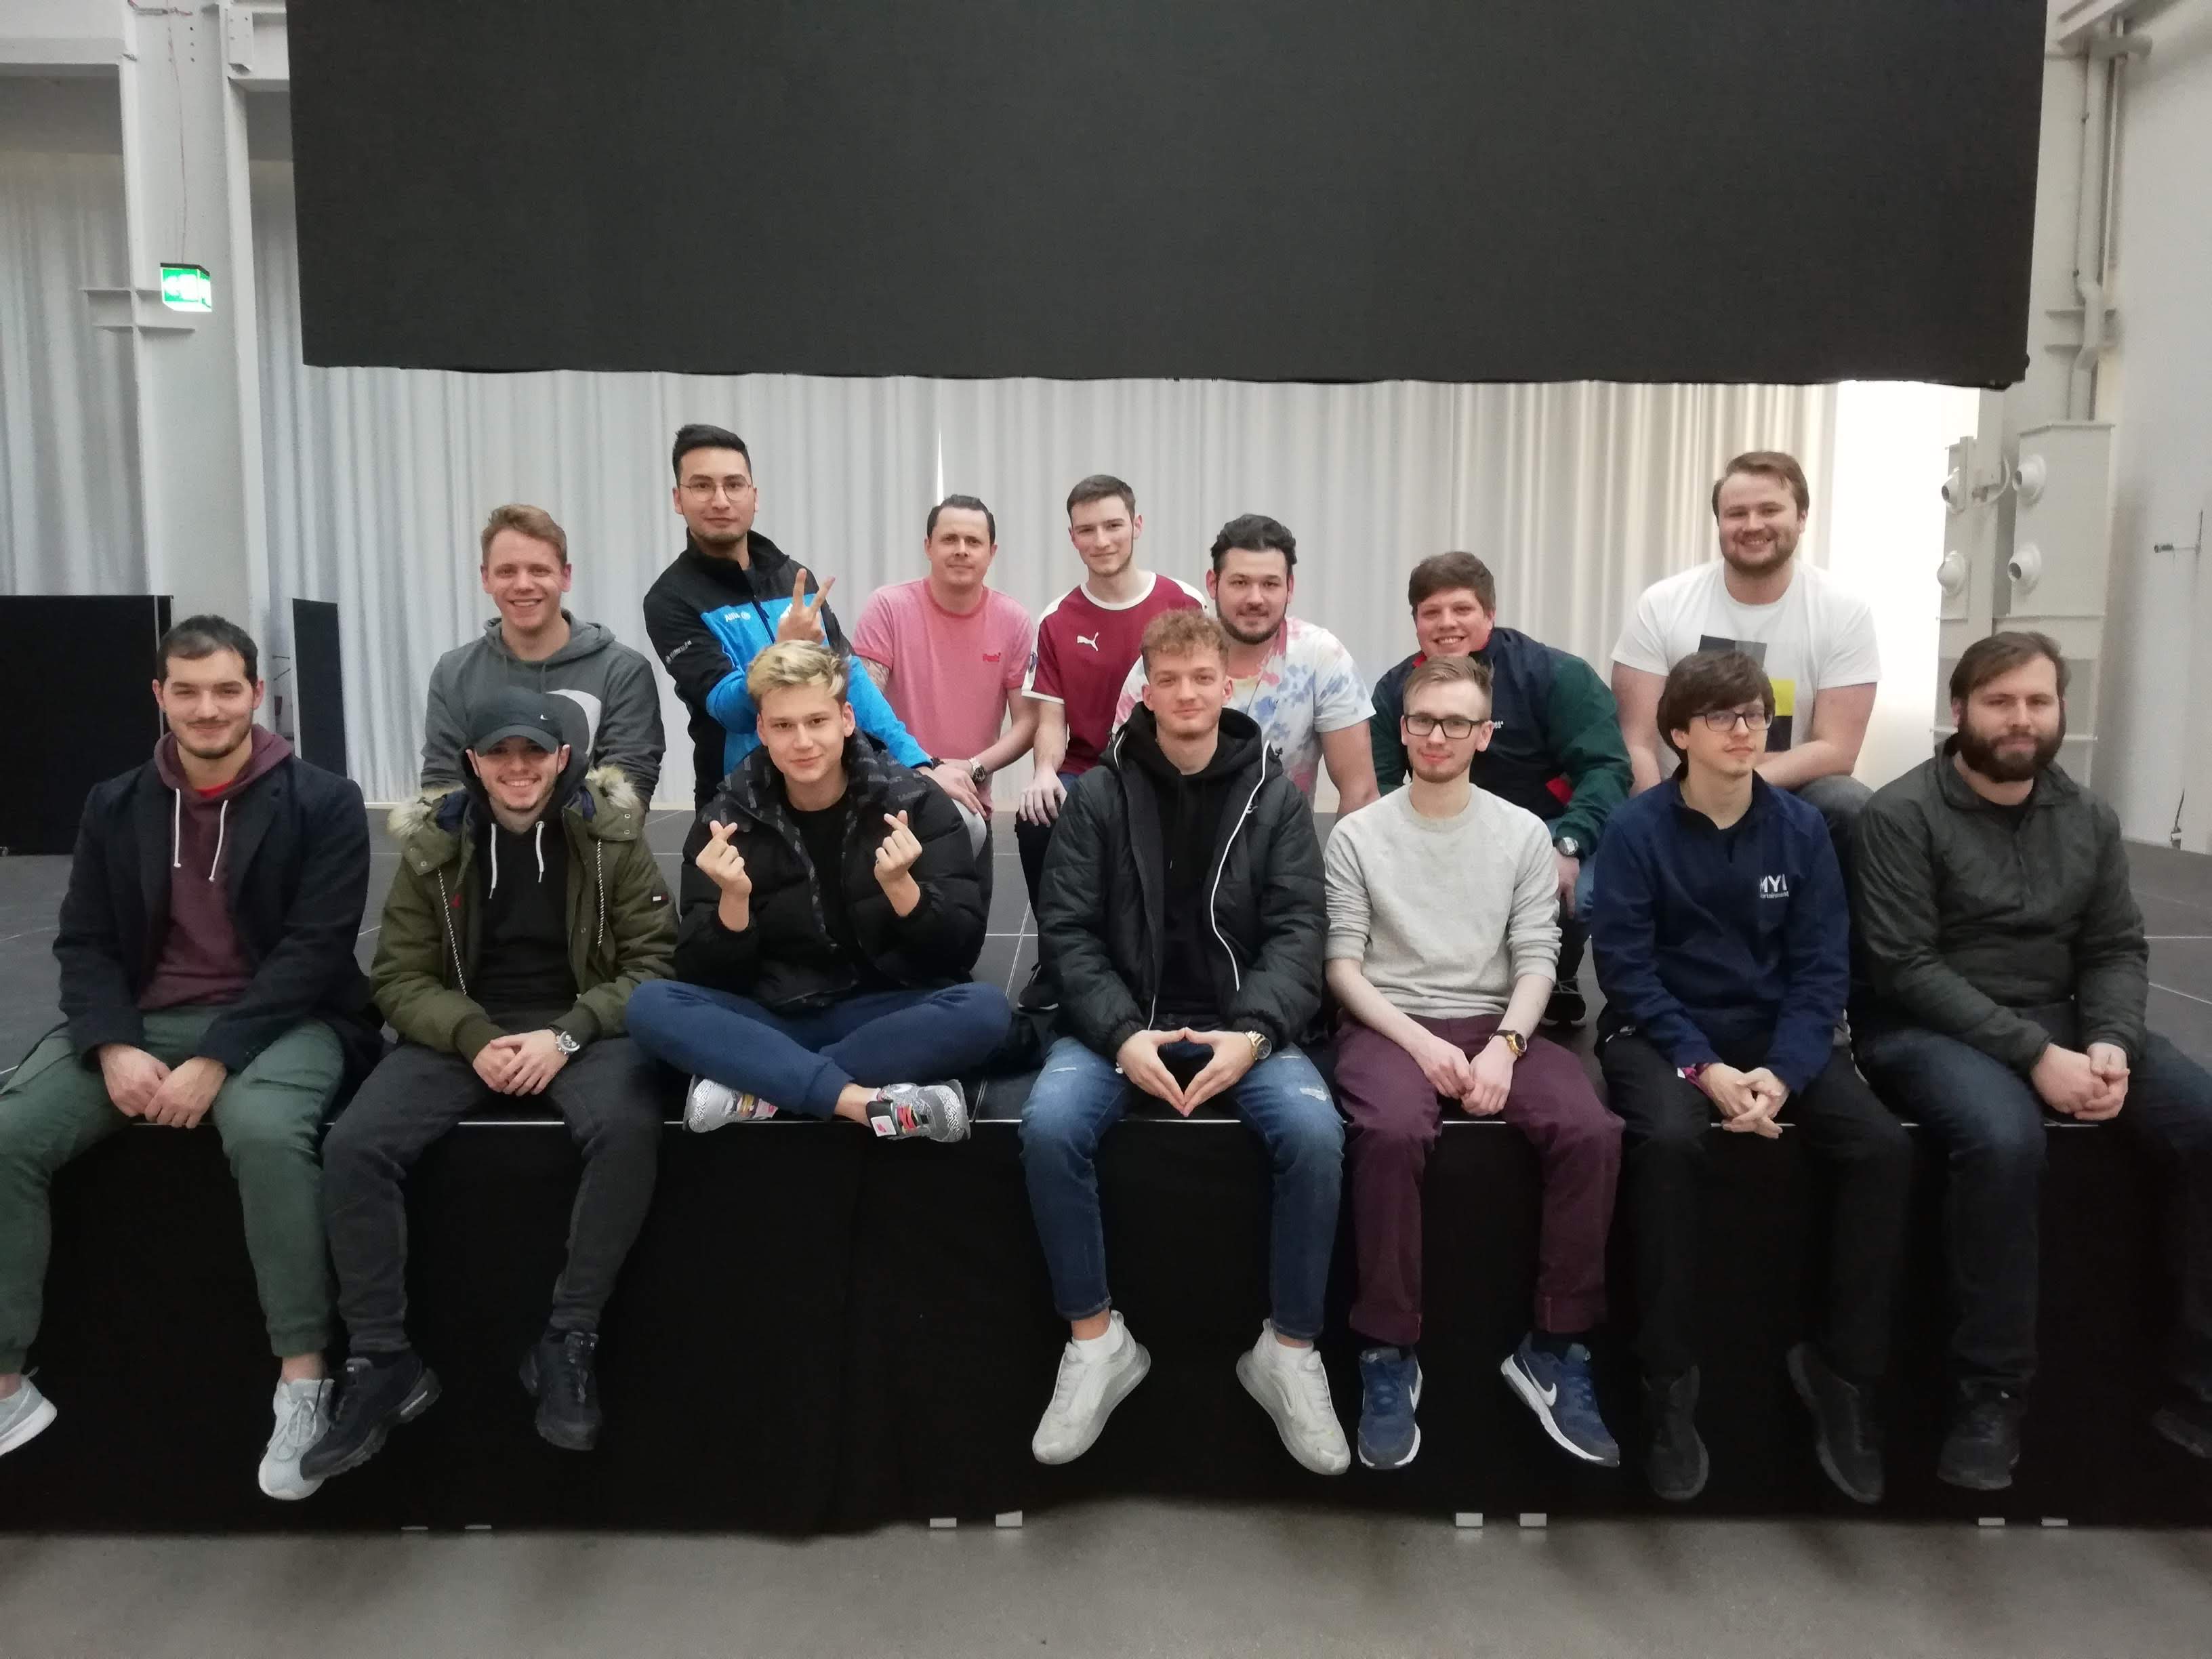 A picture of all the players that participated at the bootcamp for the RedBull unEversE 2020.